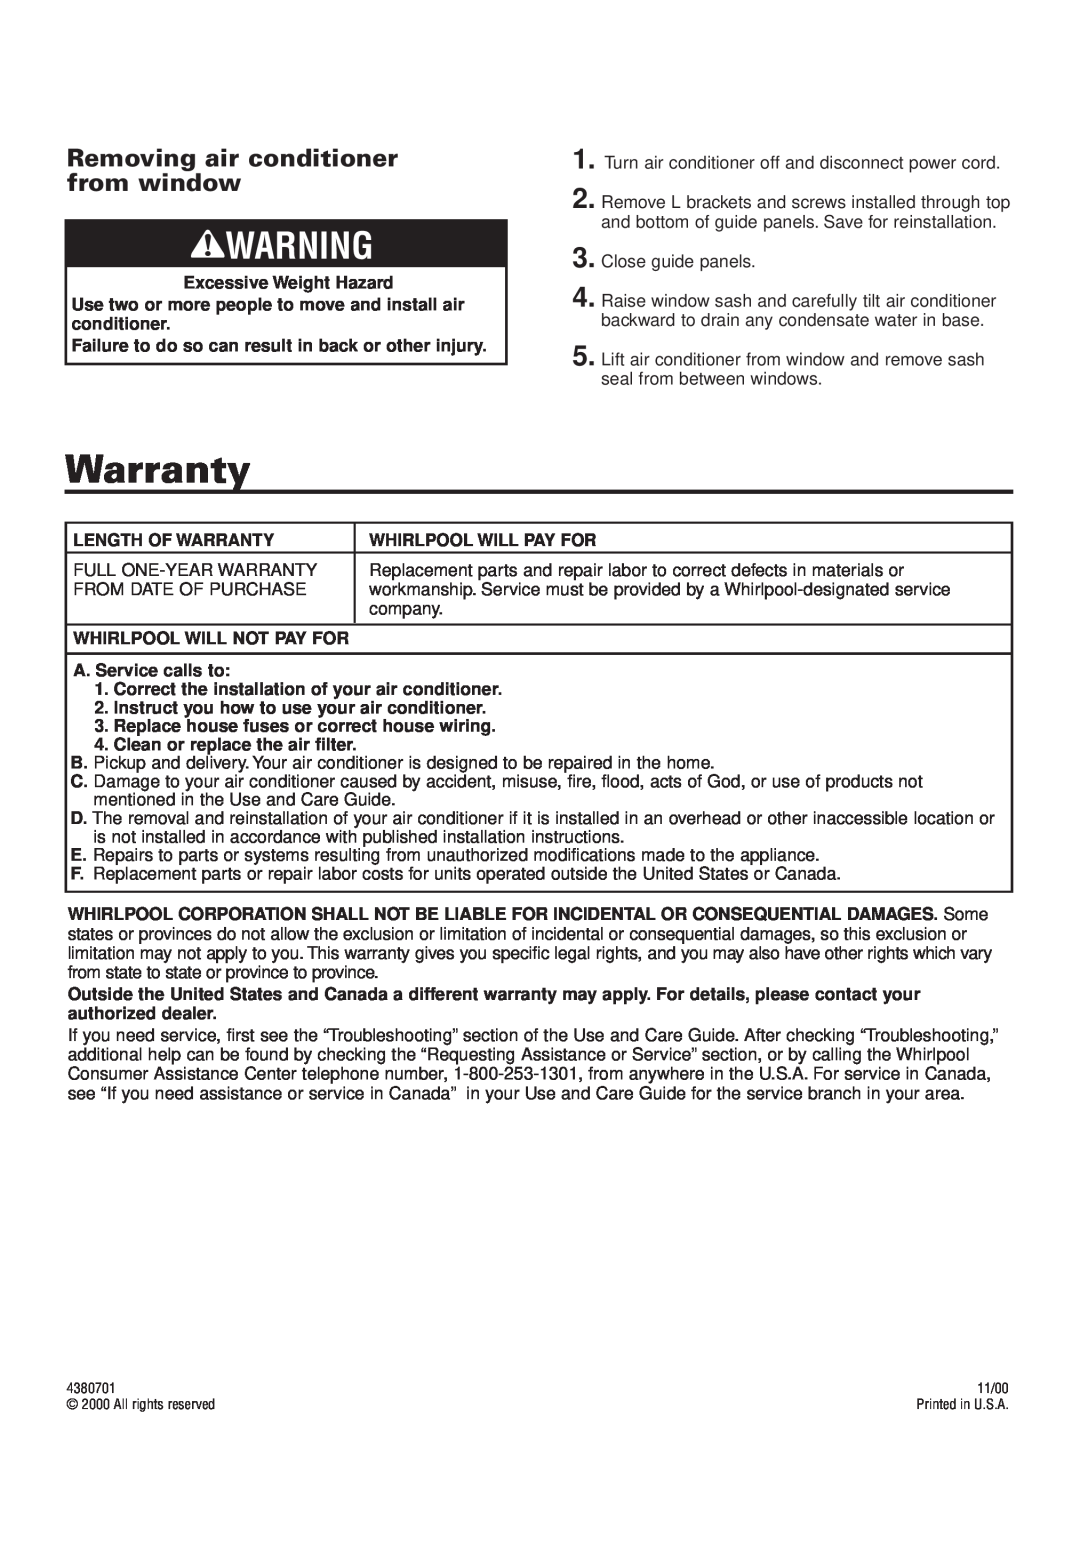 Whirlpool RA51K0, 4380701 installation instructions Warranty, Removing air conditioner from window 